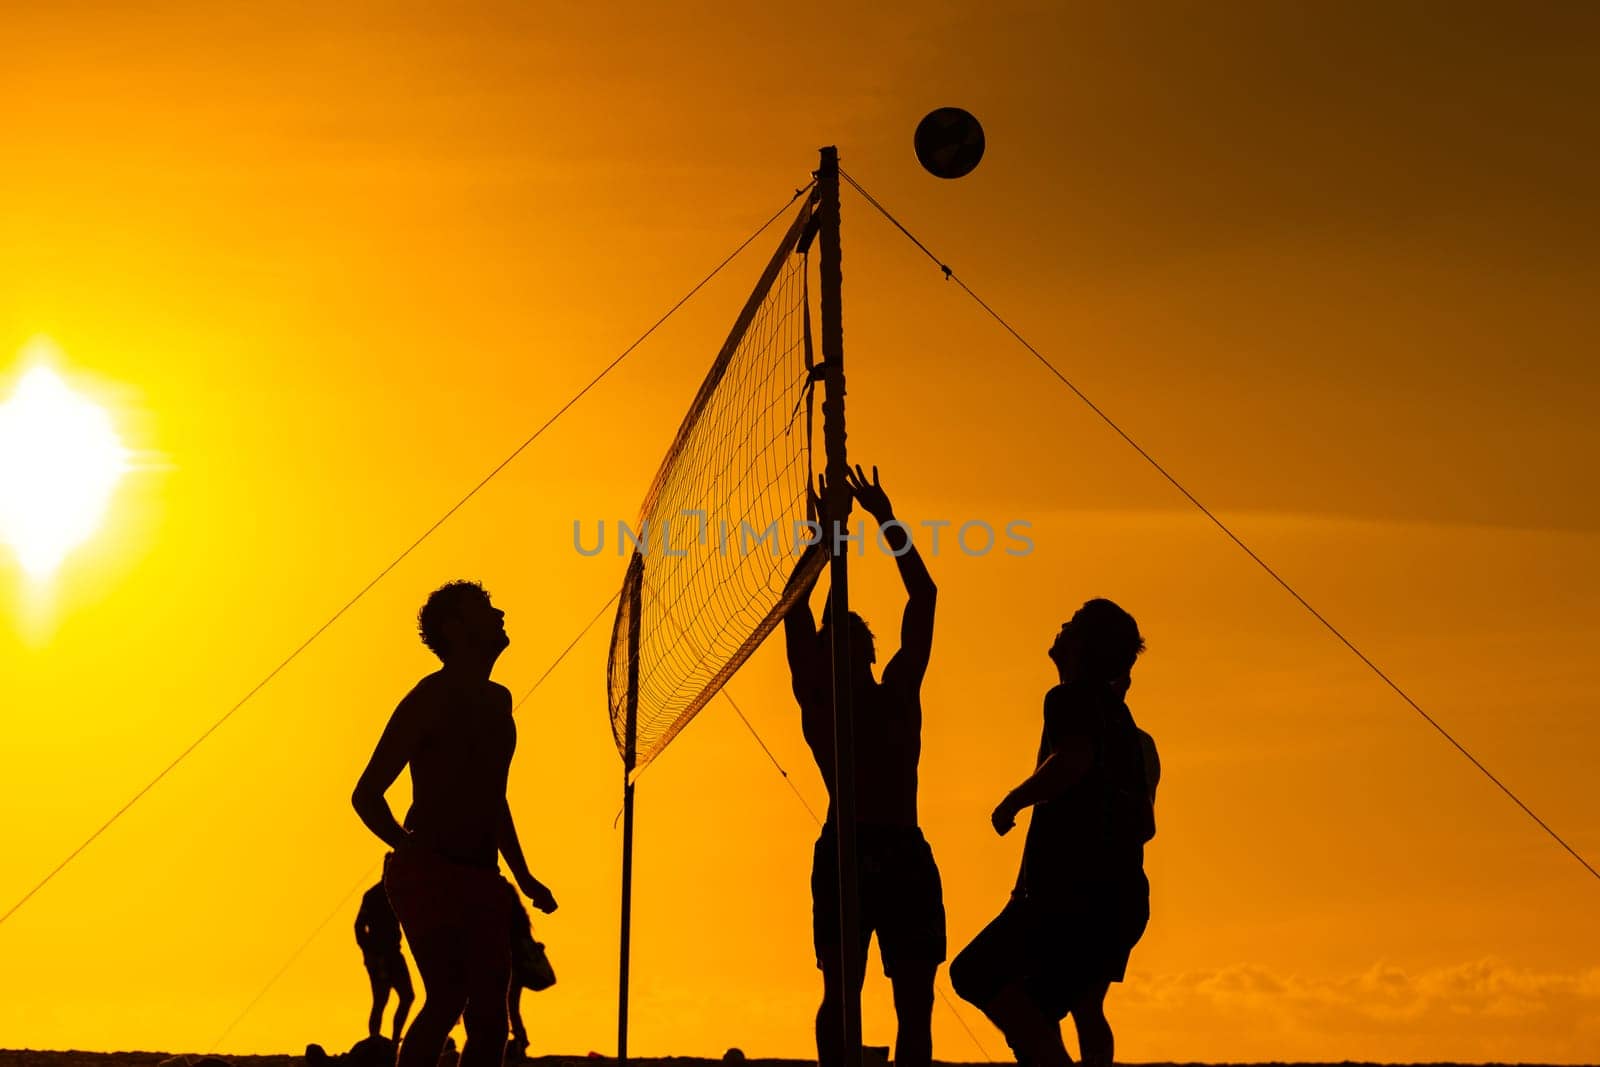 People Playing Volleyball at Sunset by Studia72